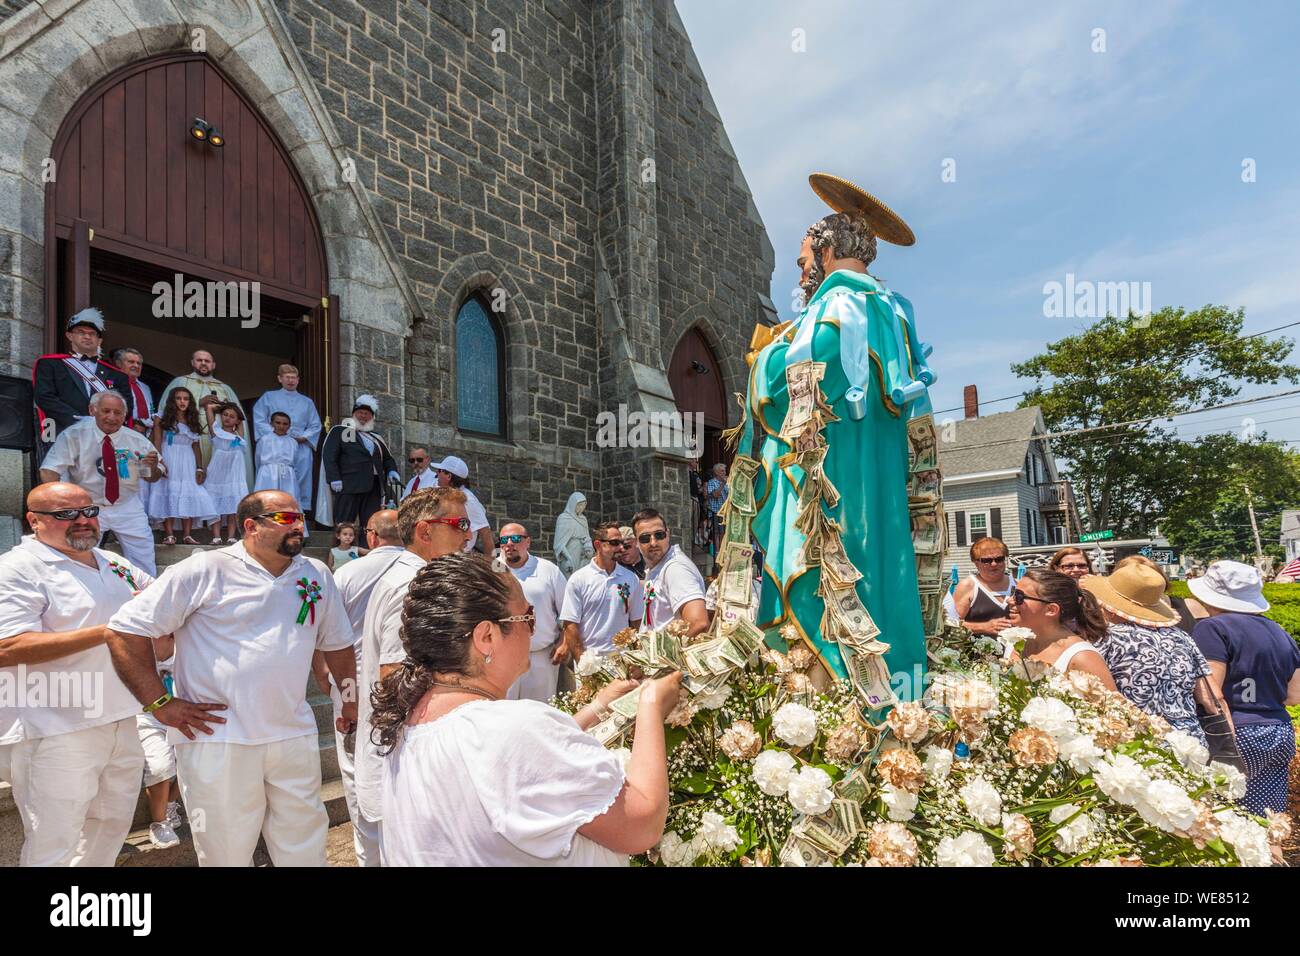 Saint peter’s fiesta gloucester hires stock photography and images Alamy